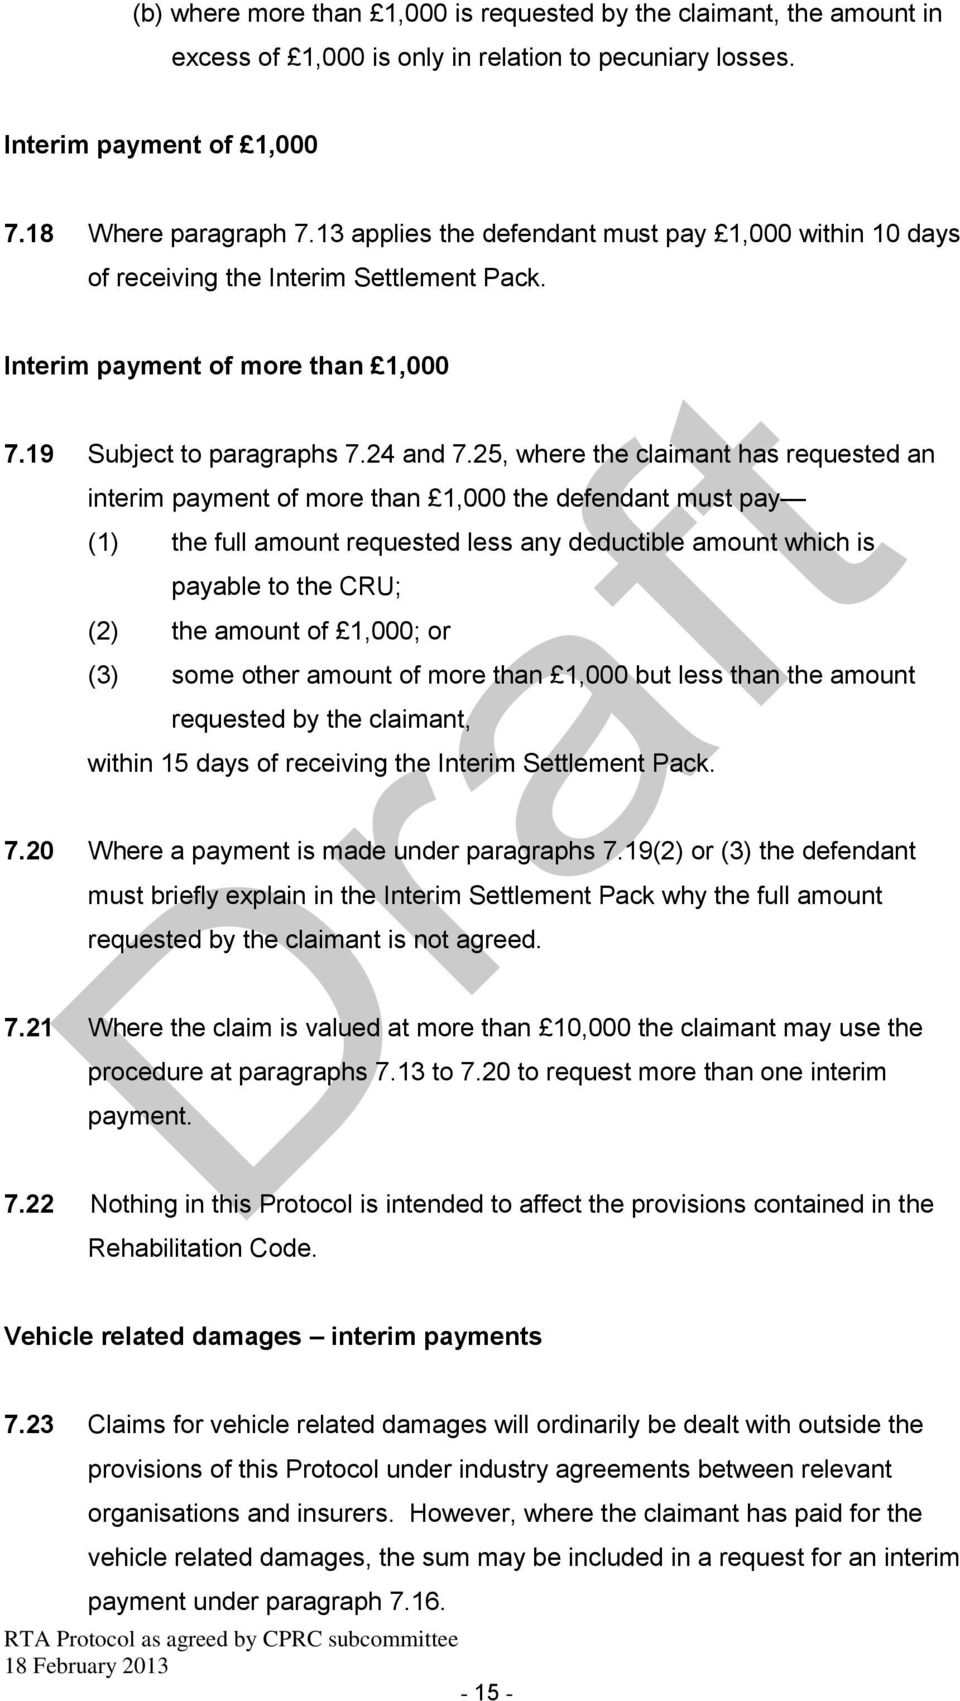 25, where the claimant has requested an interim payment of more than 1,000 the defendant must pay (1) the full amount requested less any deductible amount which is payable to the CRU; (2) the amount